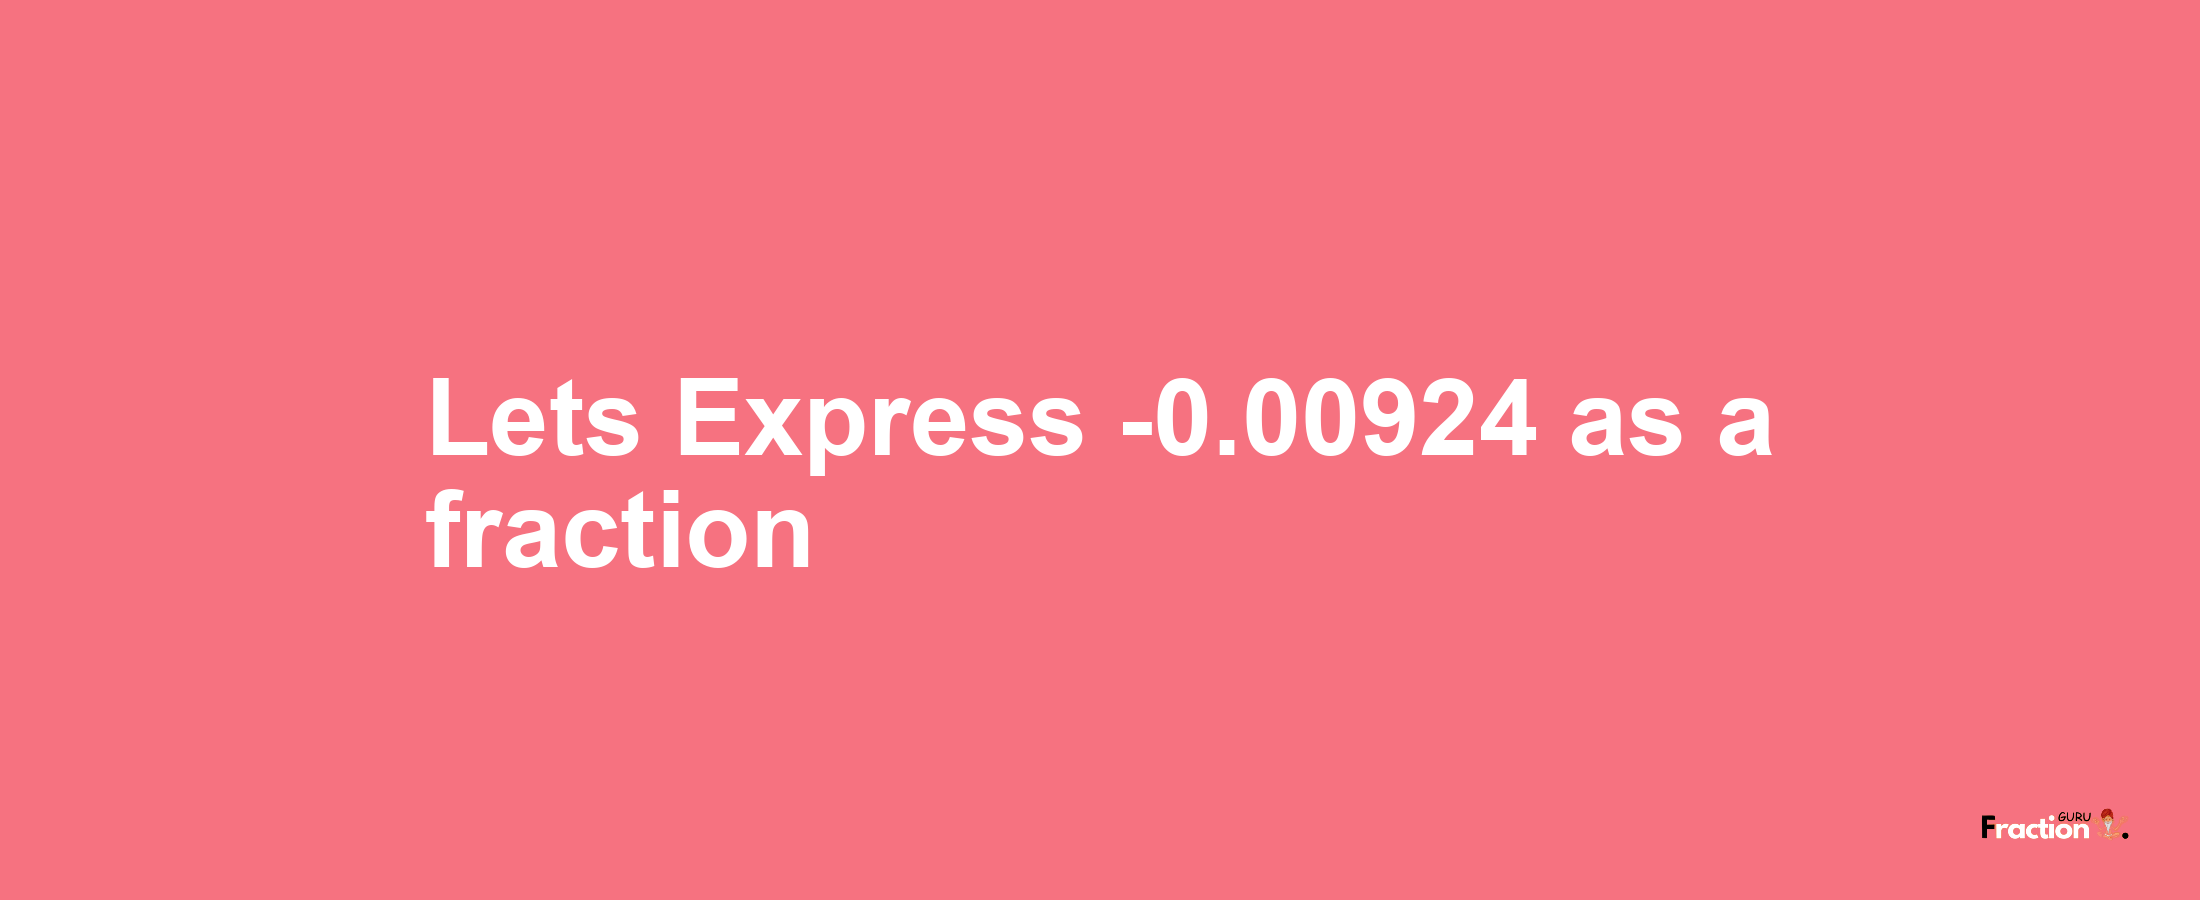 Lets Express -0.00924 as afraction